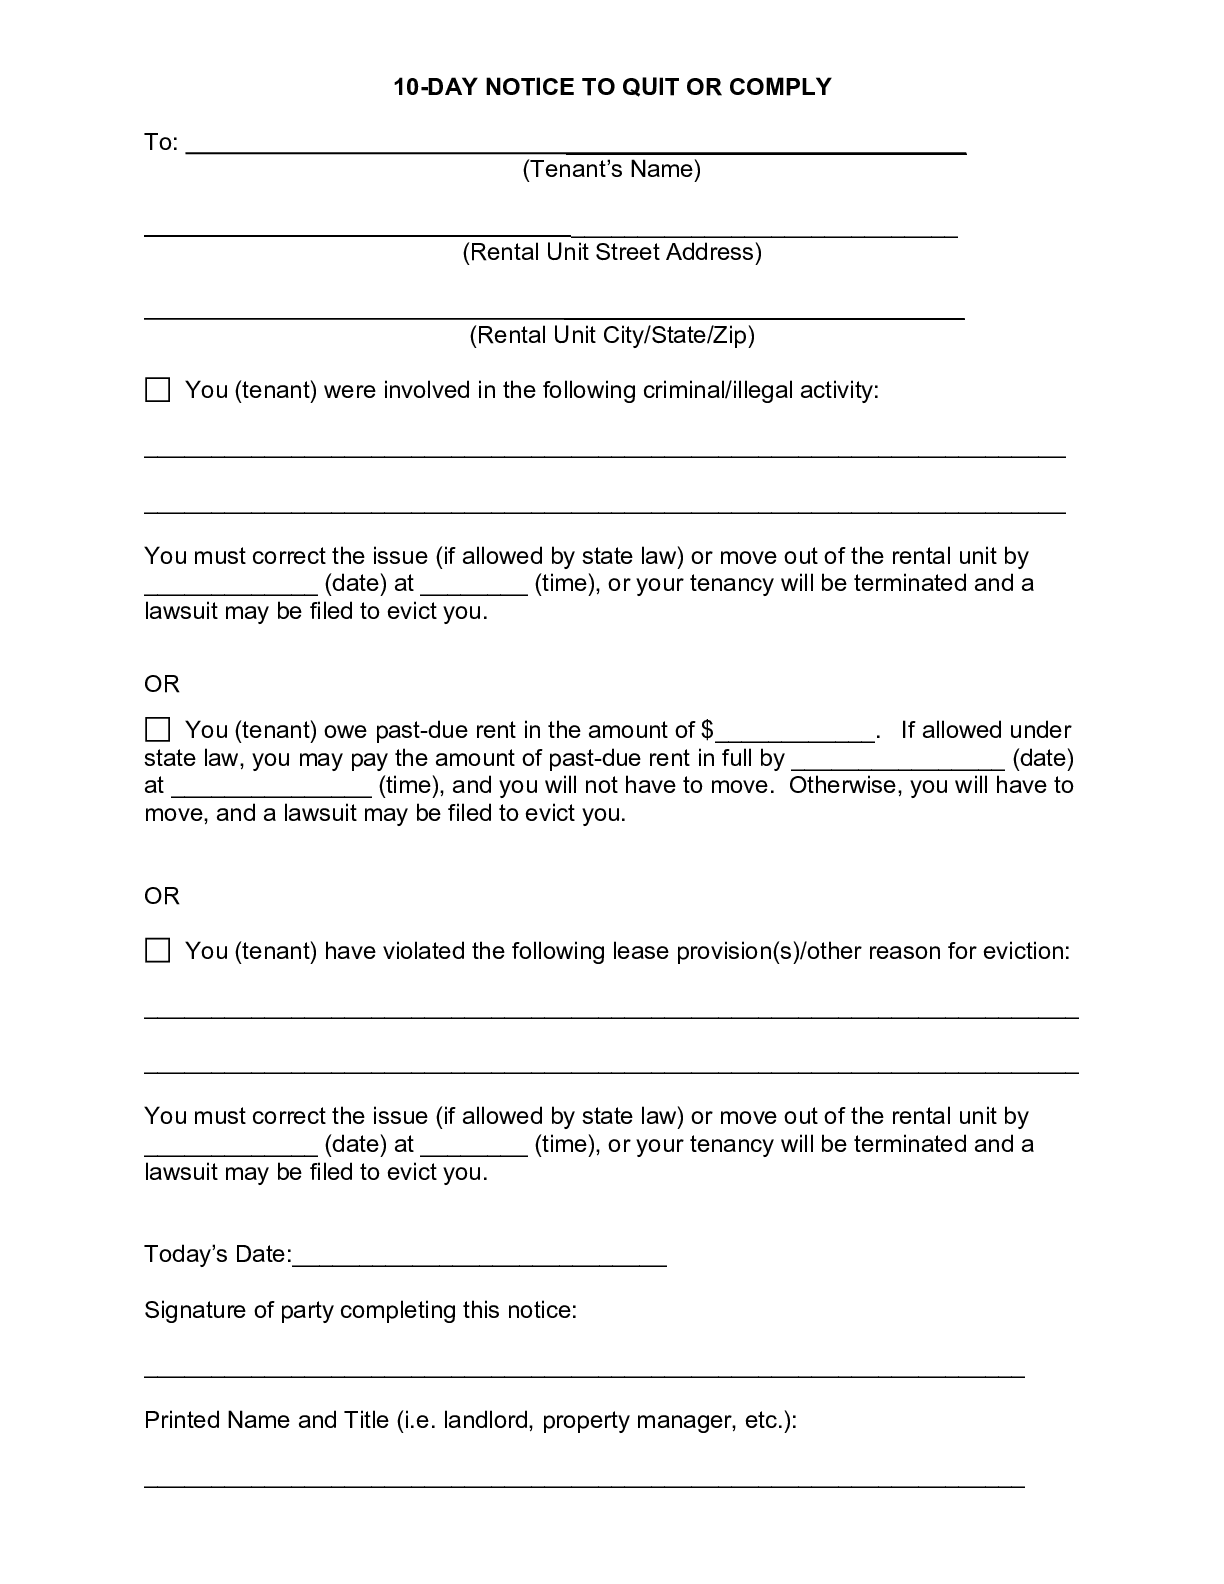 free-kentucky-eviction-notice-forms-pdf-word-downloads